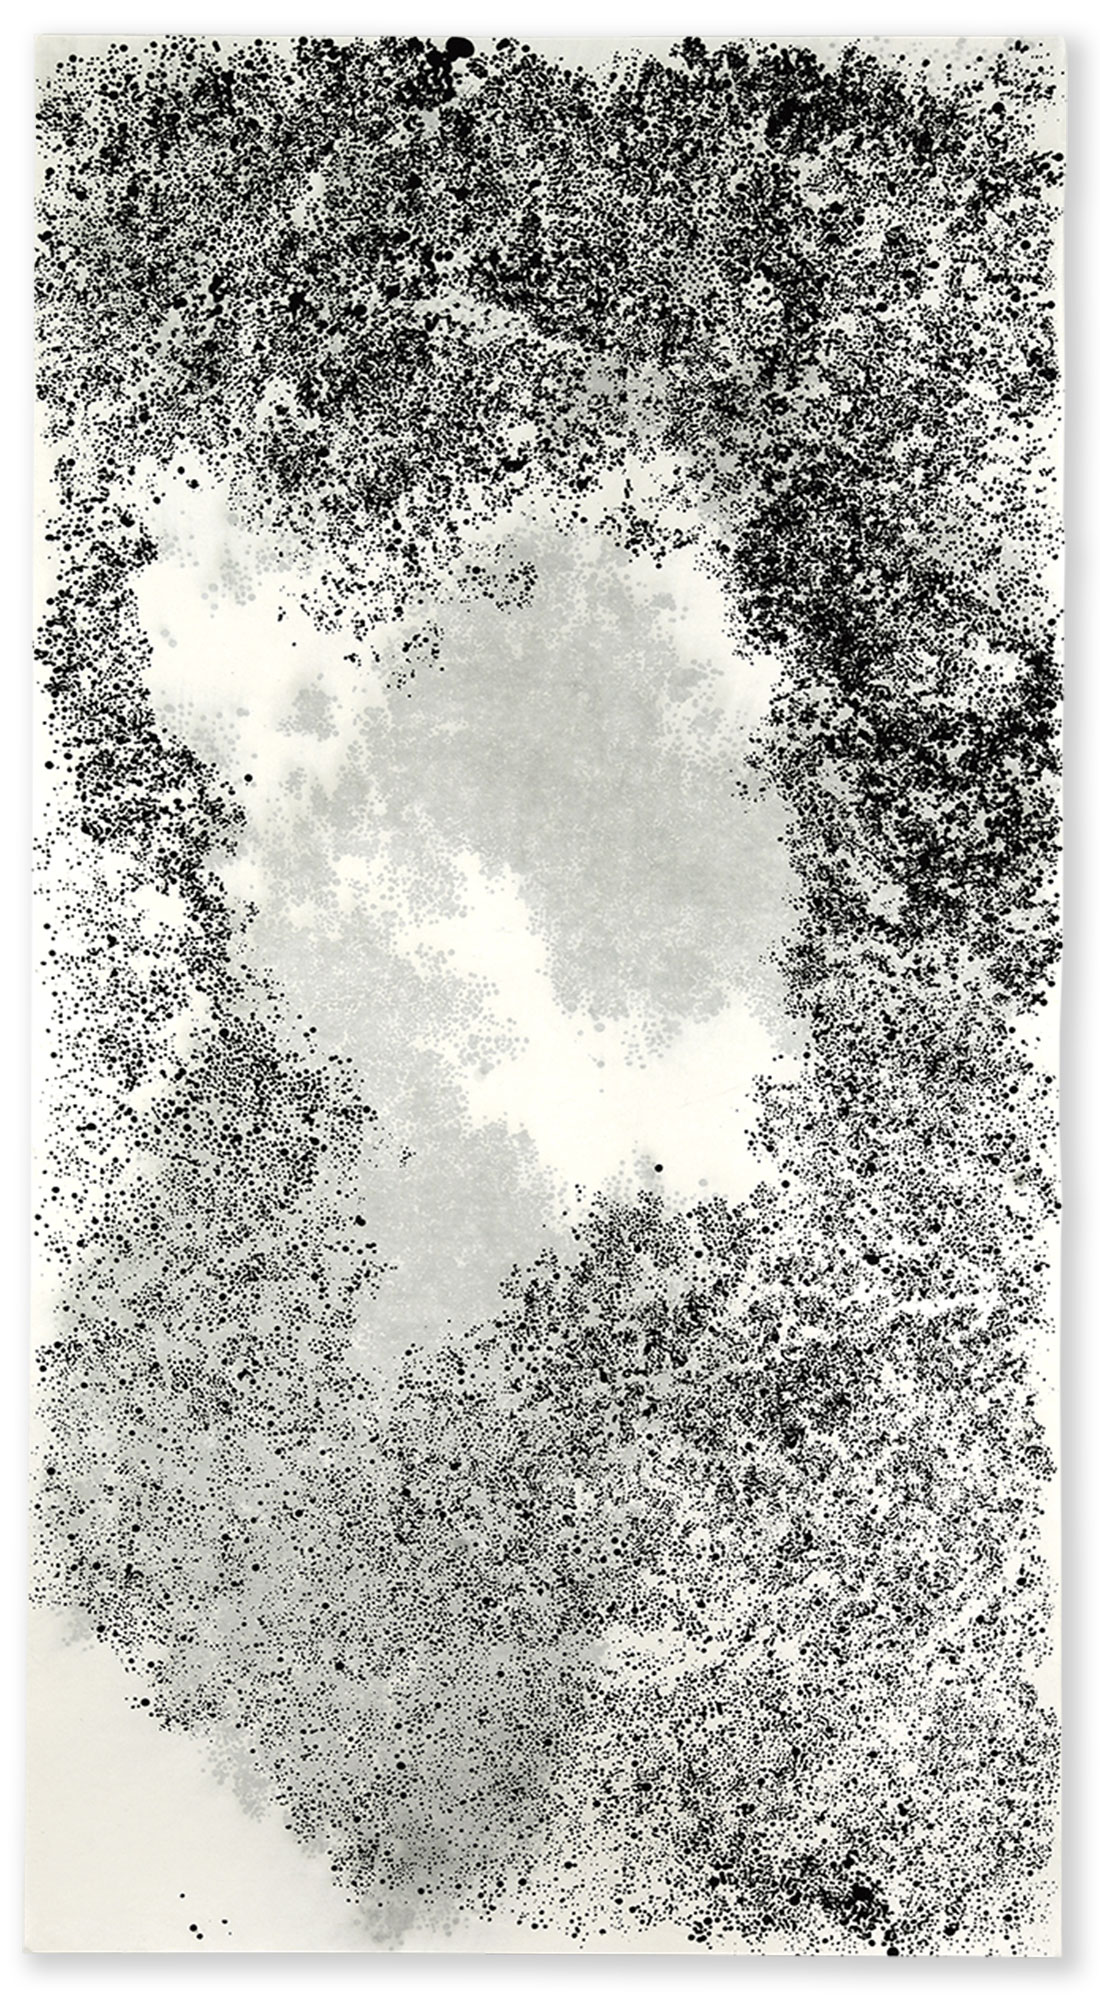 GUANGDONG SERIES X / 2006, ink on Xuan paper, 180 x 95 cm